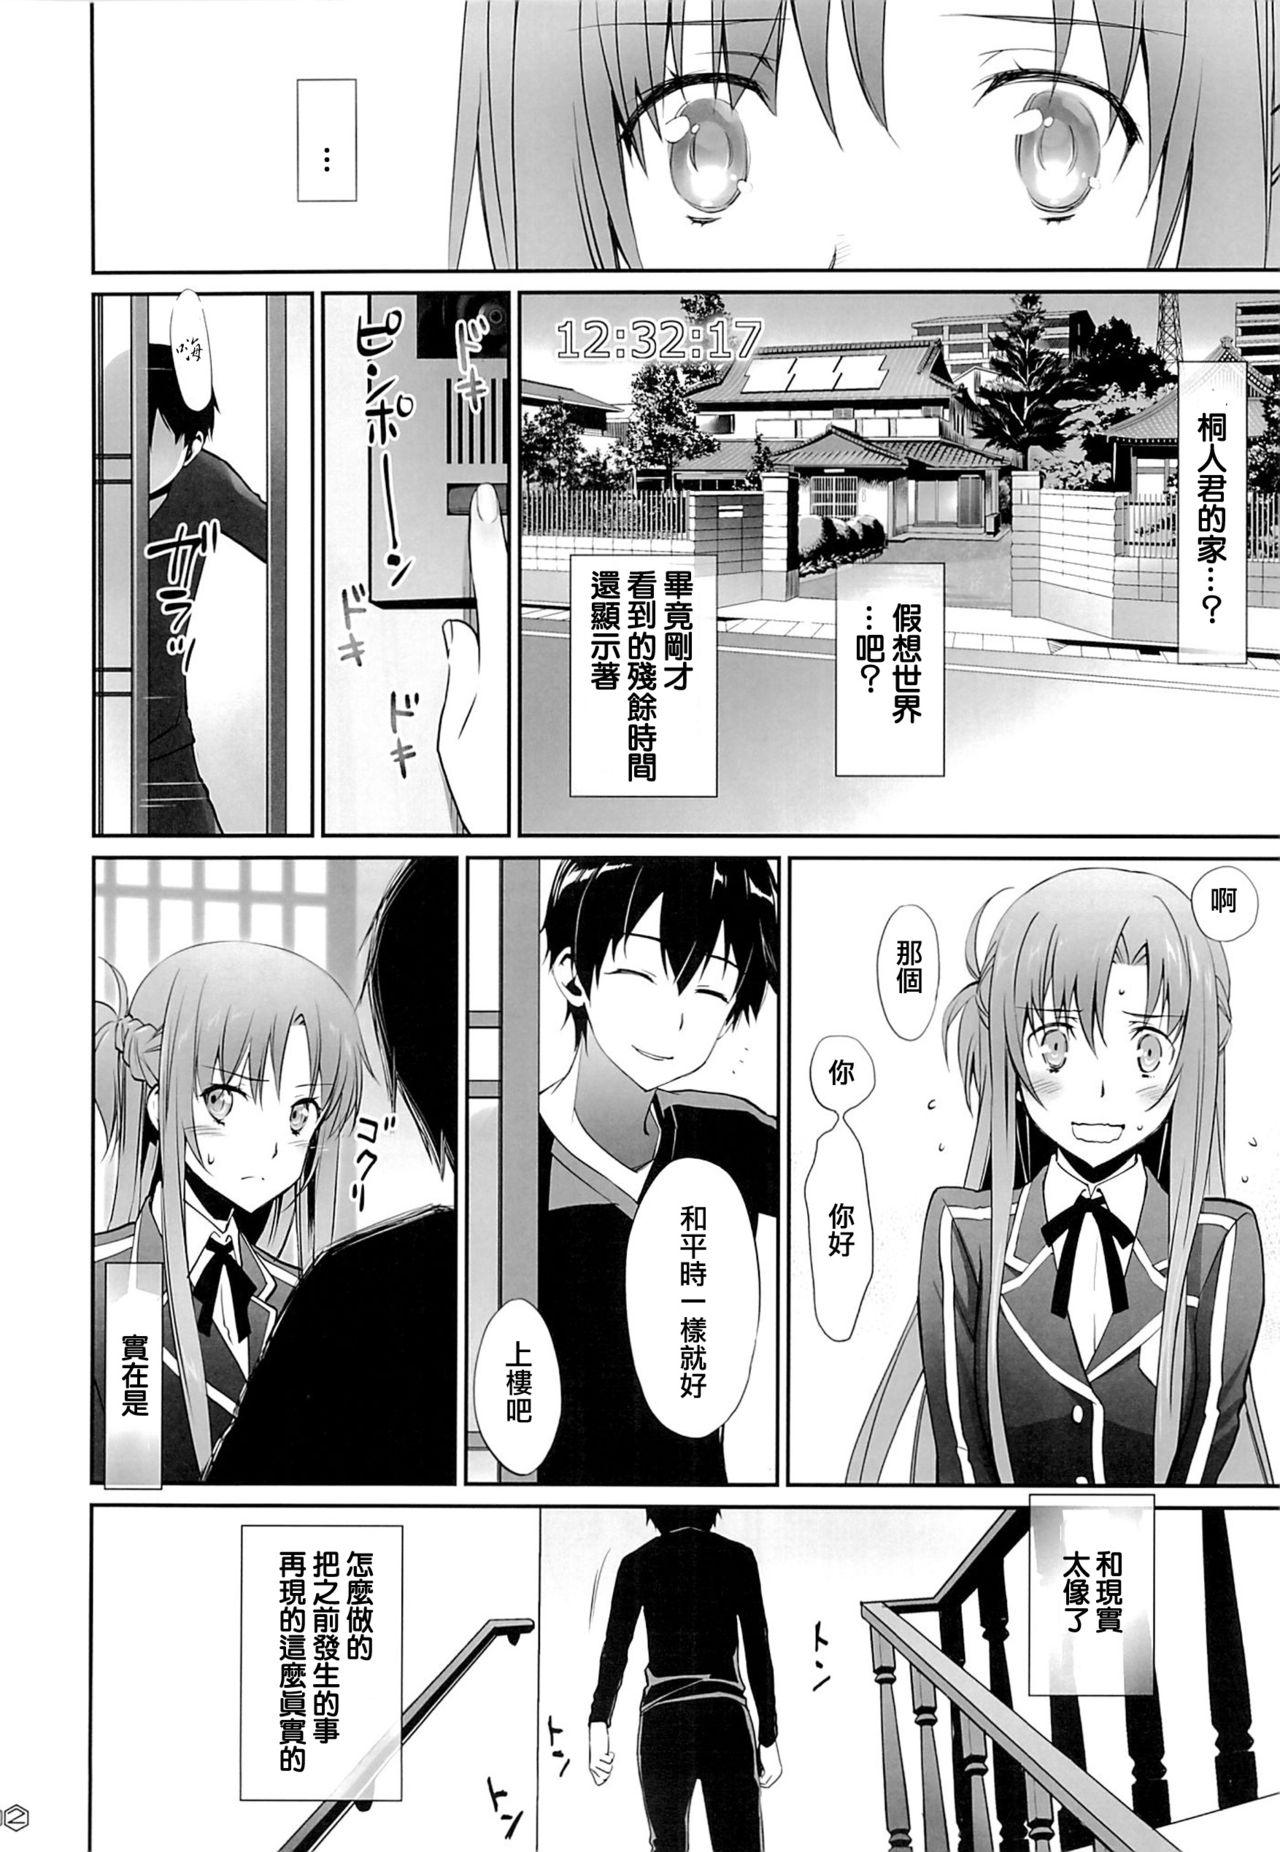 Chileno turnover - Sword art online College - Page 11